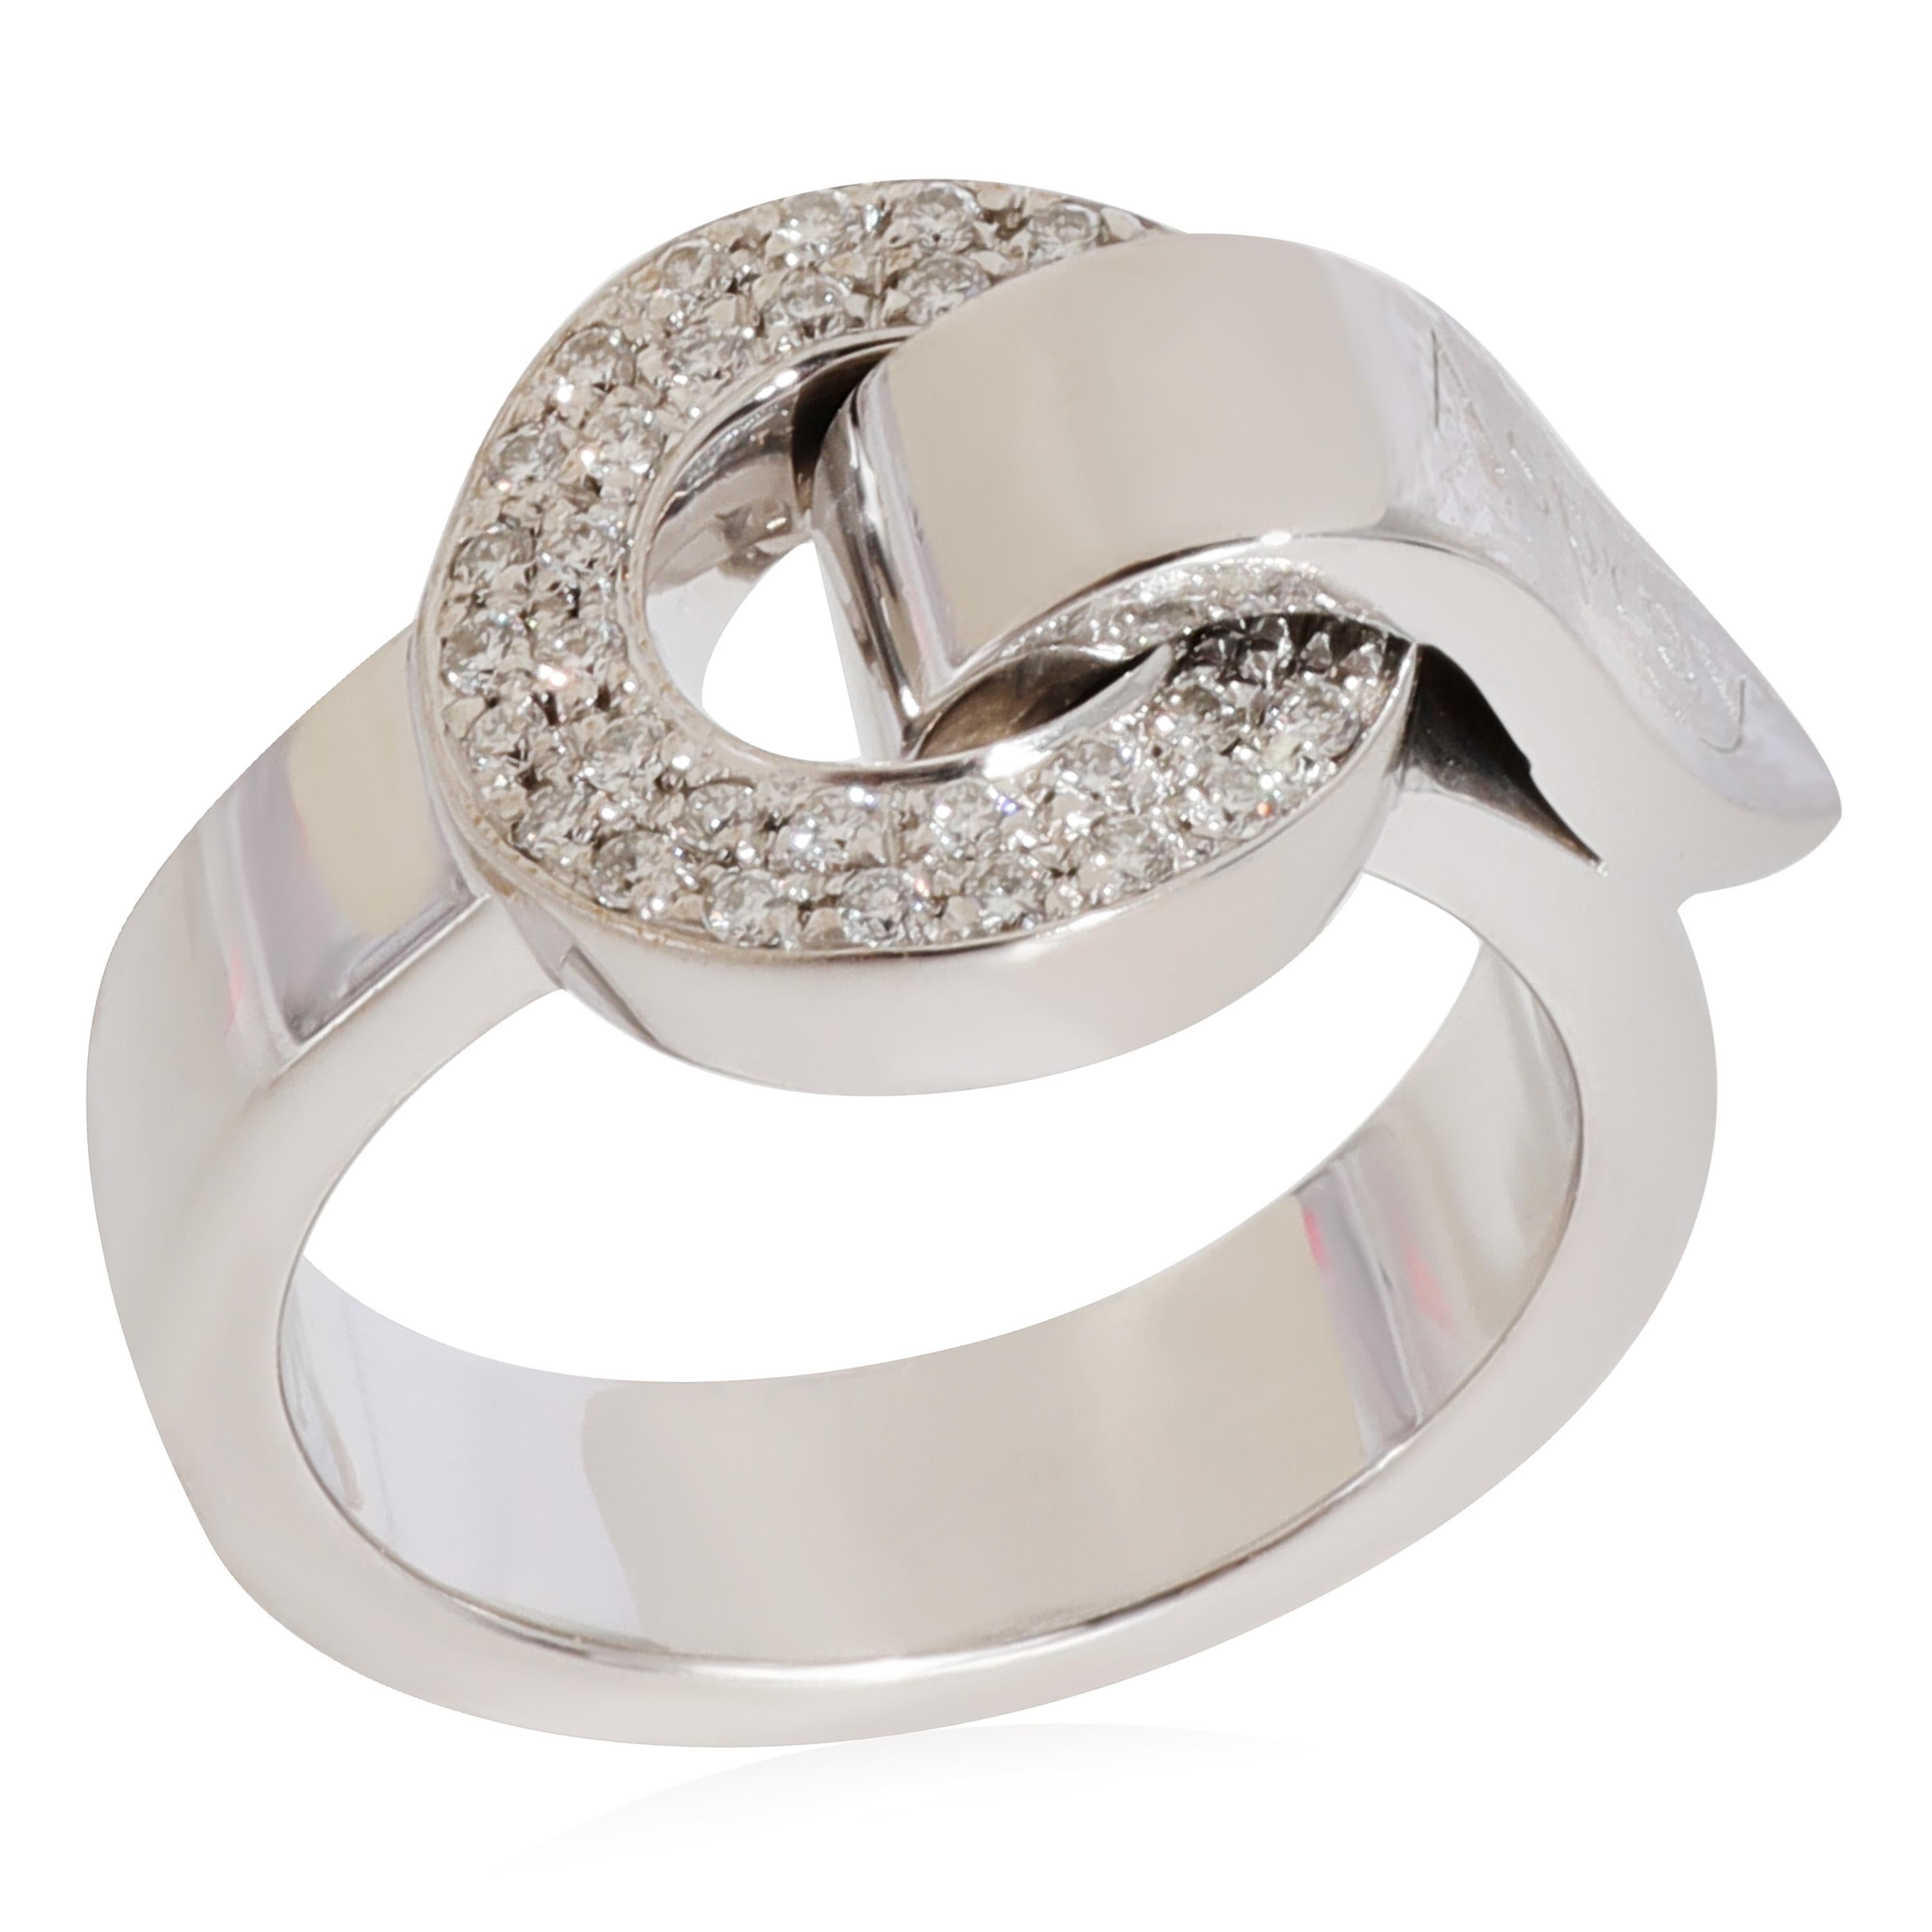 Asprey Diamond  Ring in 18k White Gold 0.2 CTW

PRIMARY DETAILS
SKU: 125167
Listing Title: Asprey Diamond  Ring in 18k White Gold 0.2 CTW
Condition Description: Retails for 3200 USD. In excellent condition and recently polished. Ring size is